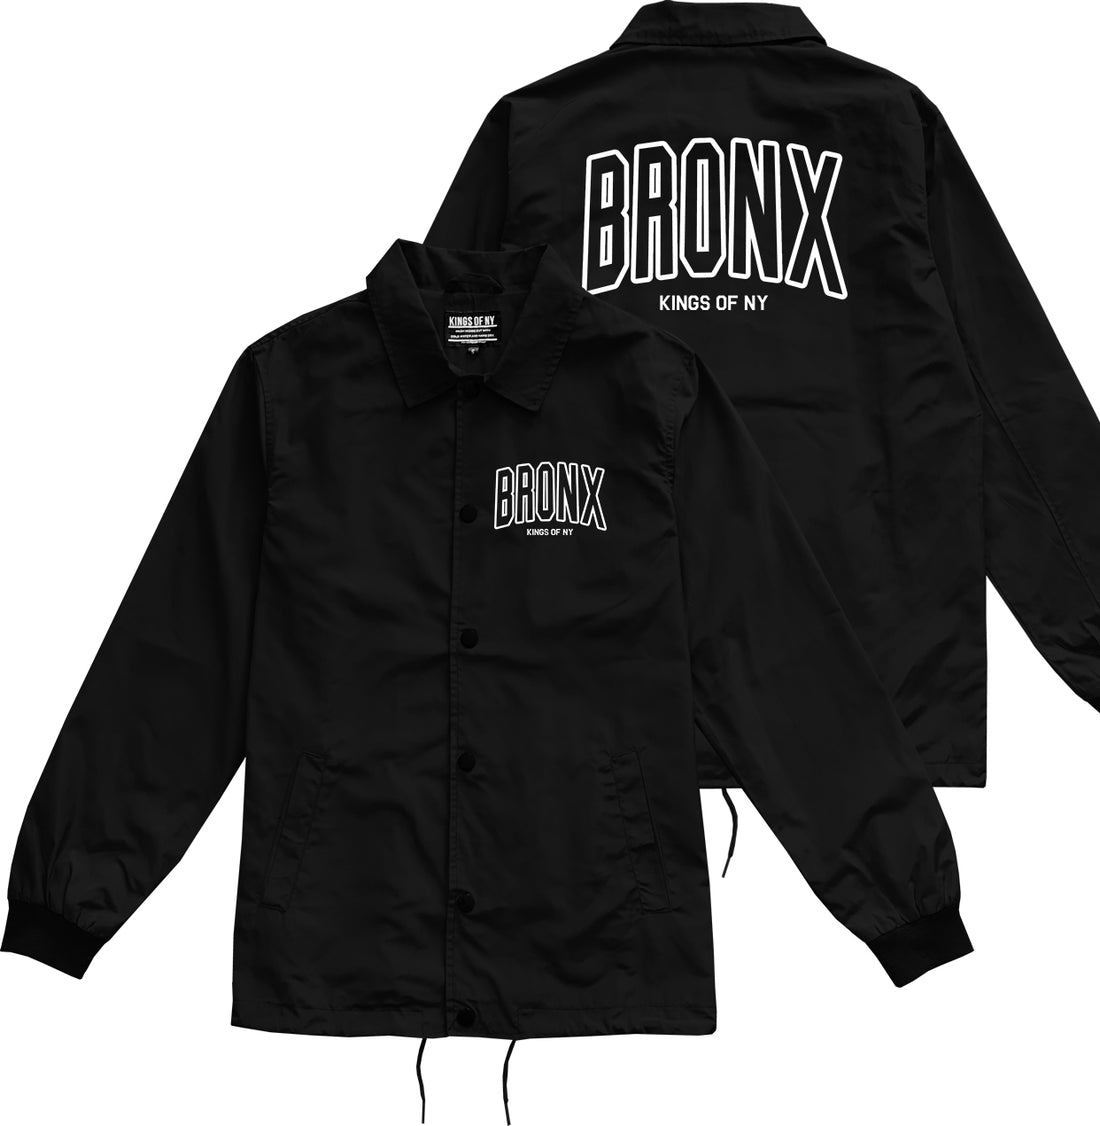 BRONX College Outline Mens Coaches Jacket Black by Kings Of NY